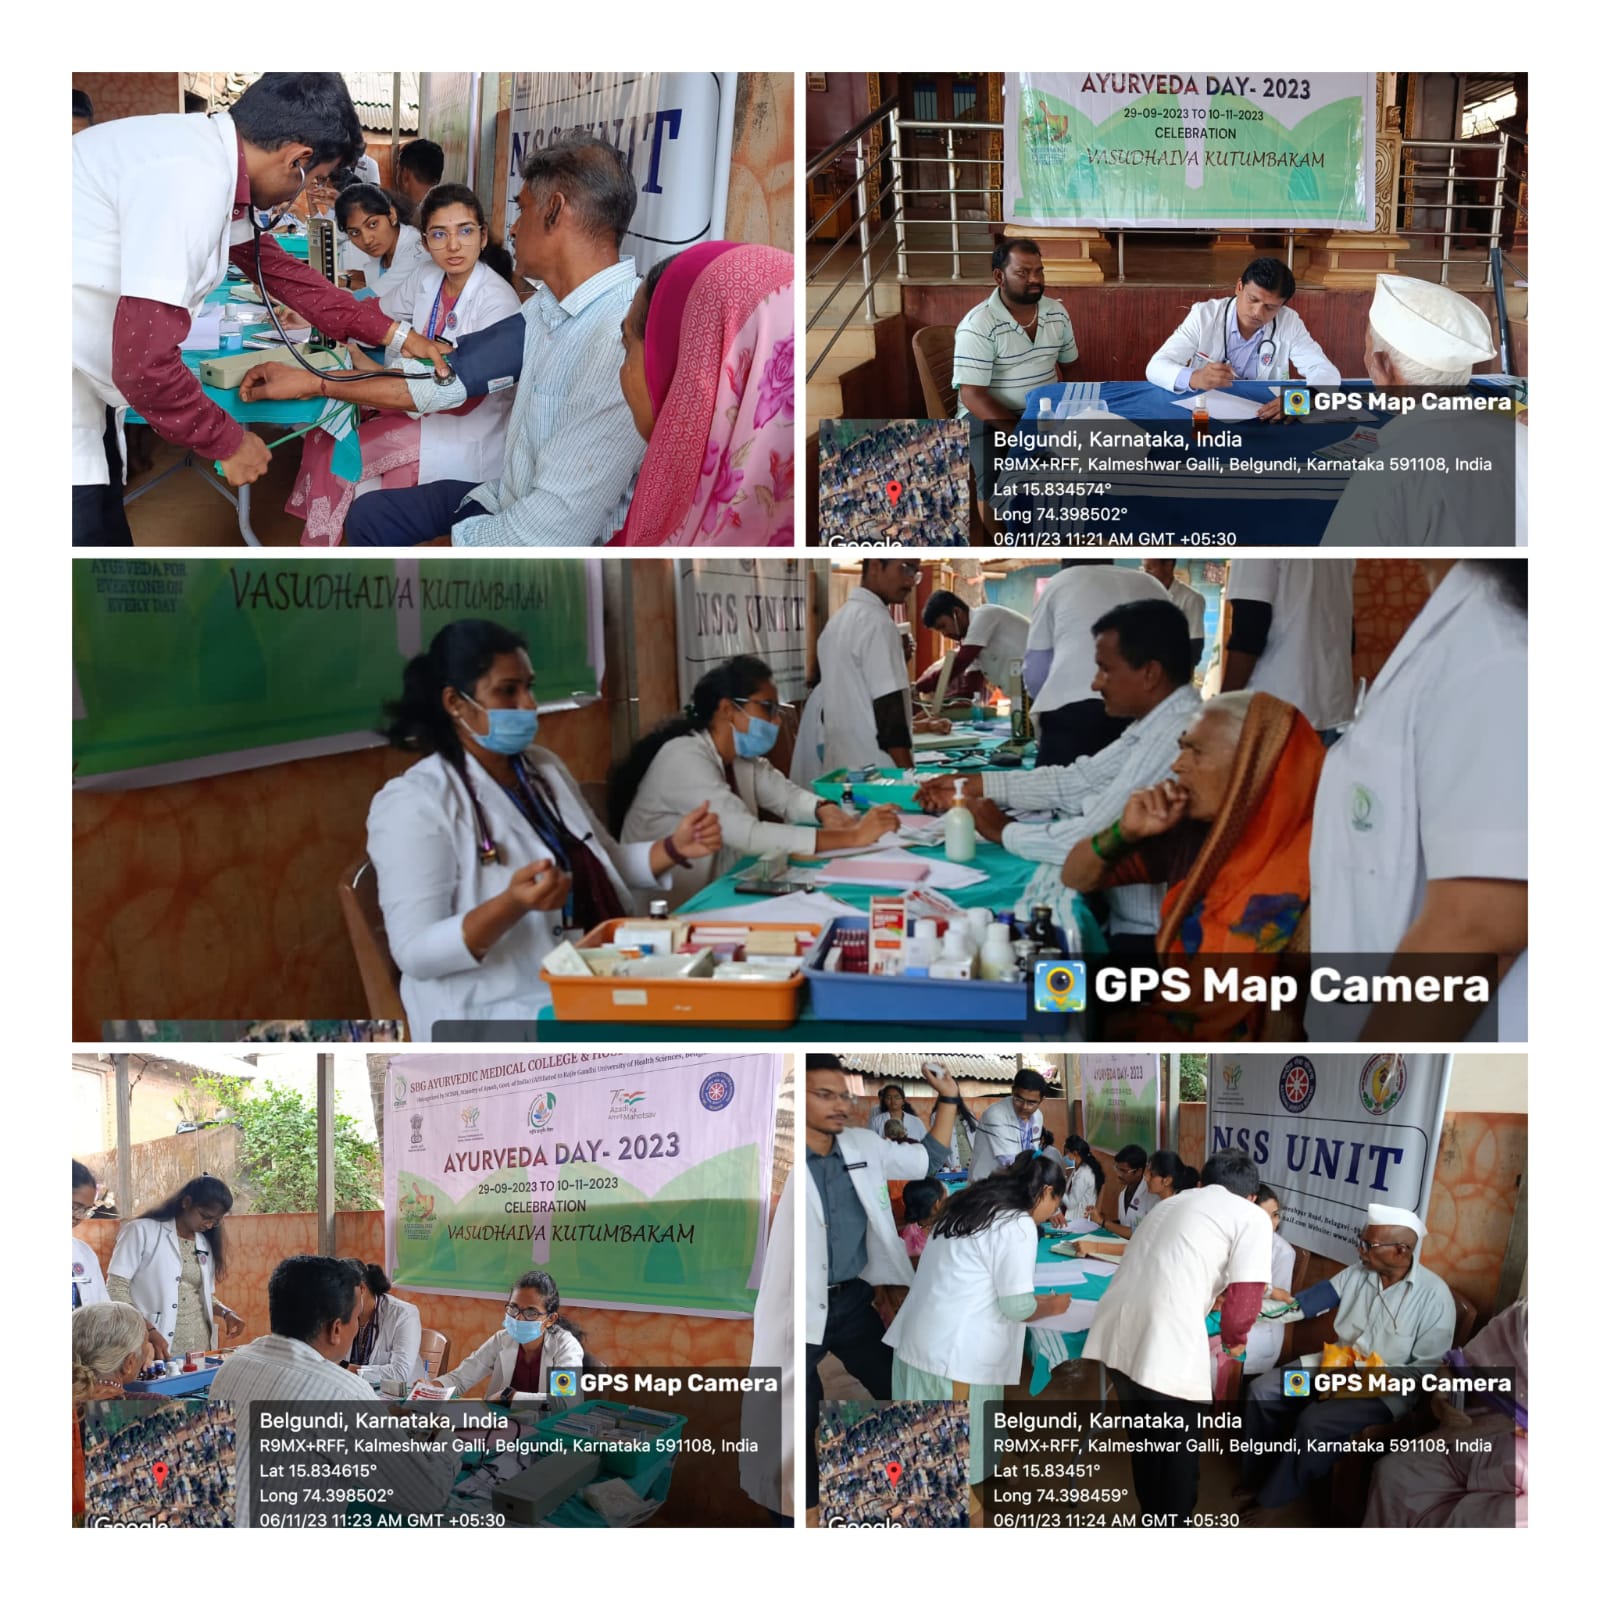 0n the Eve of Ayurveda Day ,series of events conducted- Health Check Up camp,Awareness Programe, Ayurveda Campaign